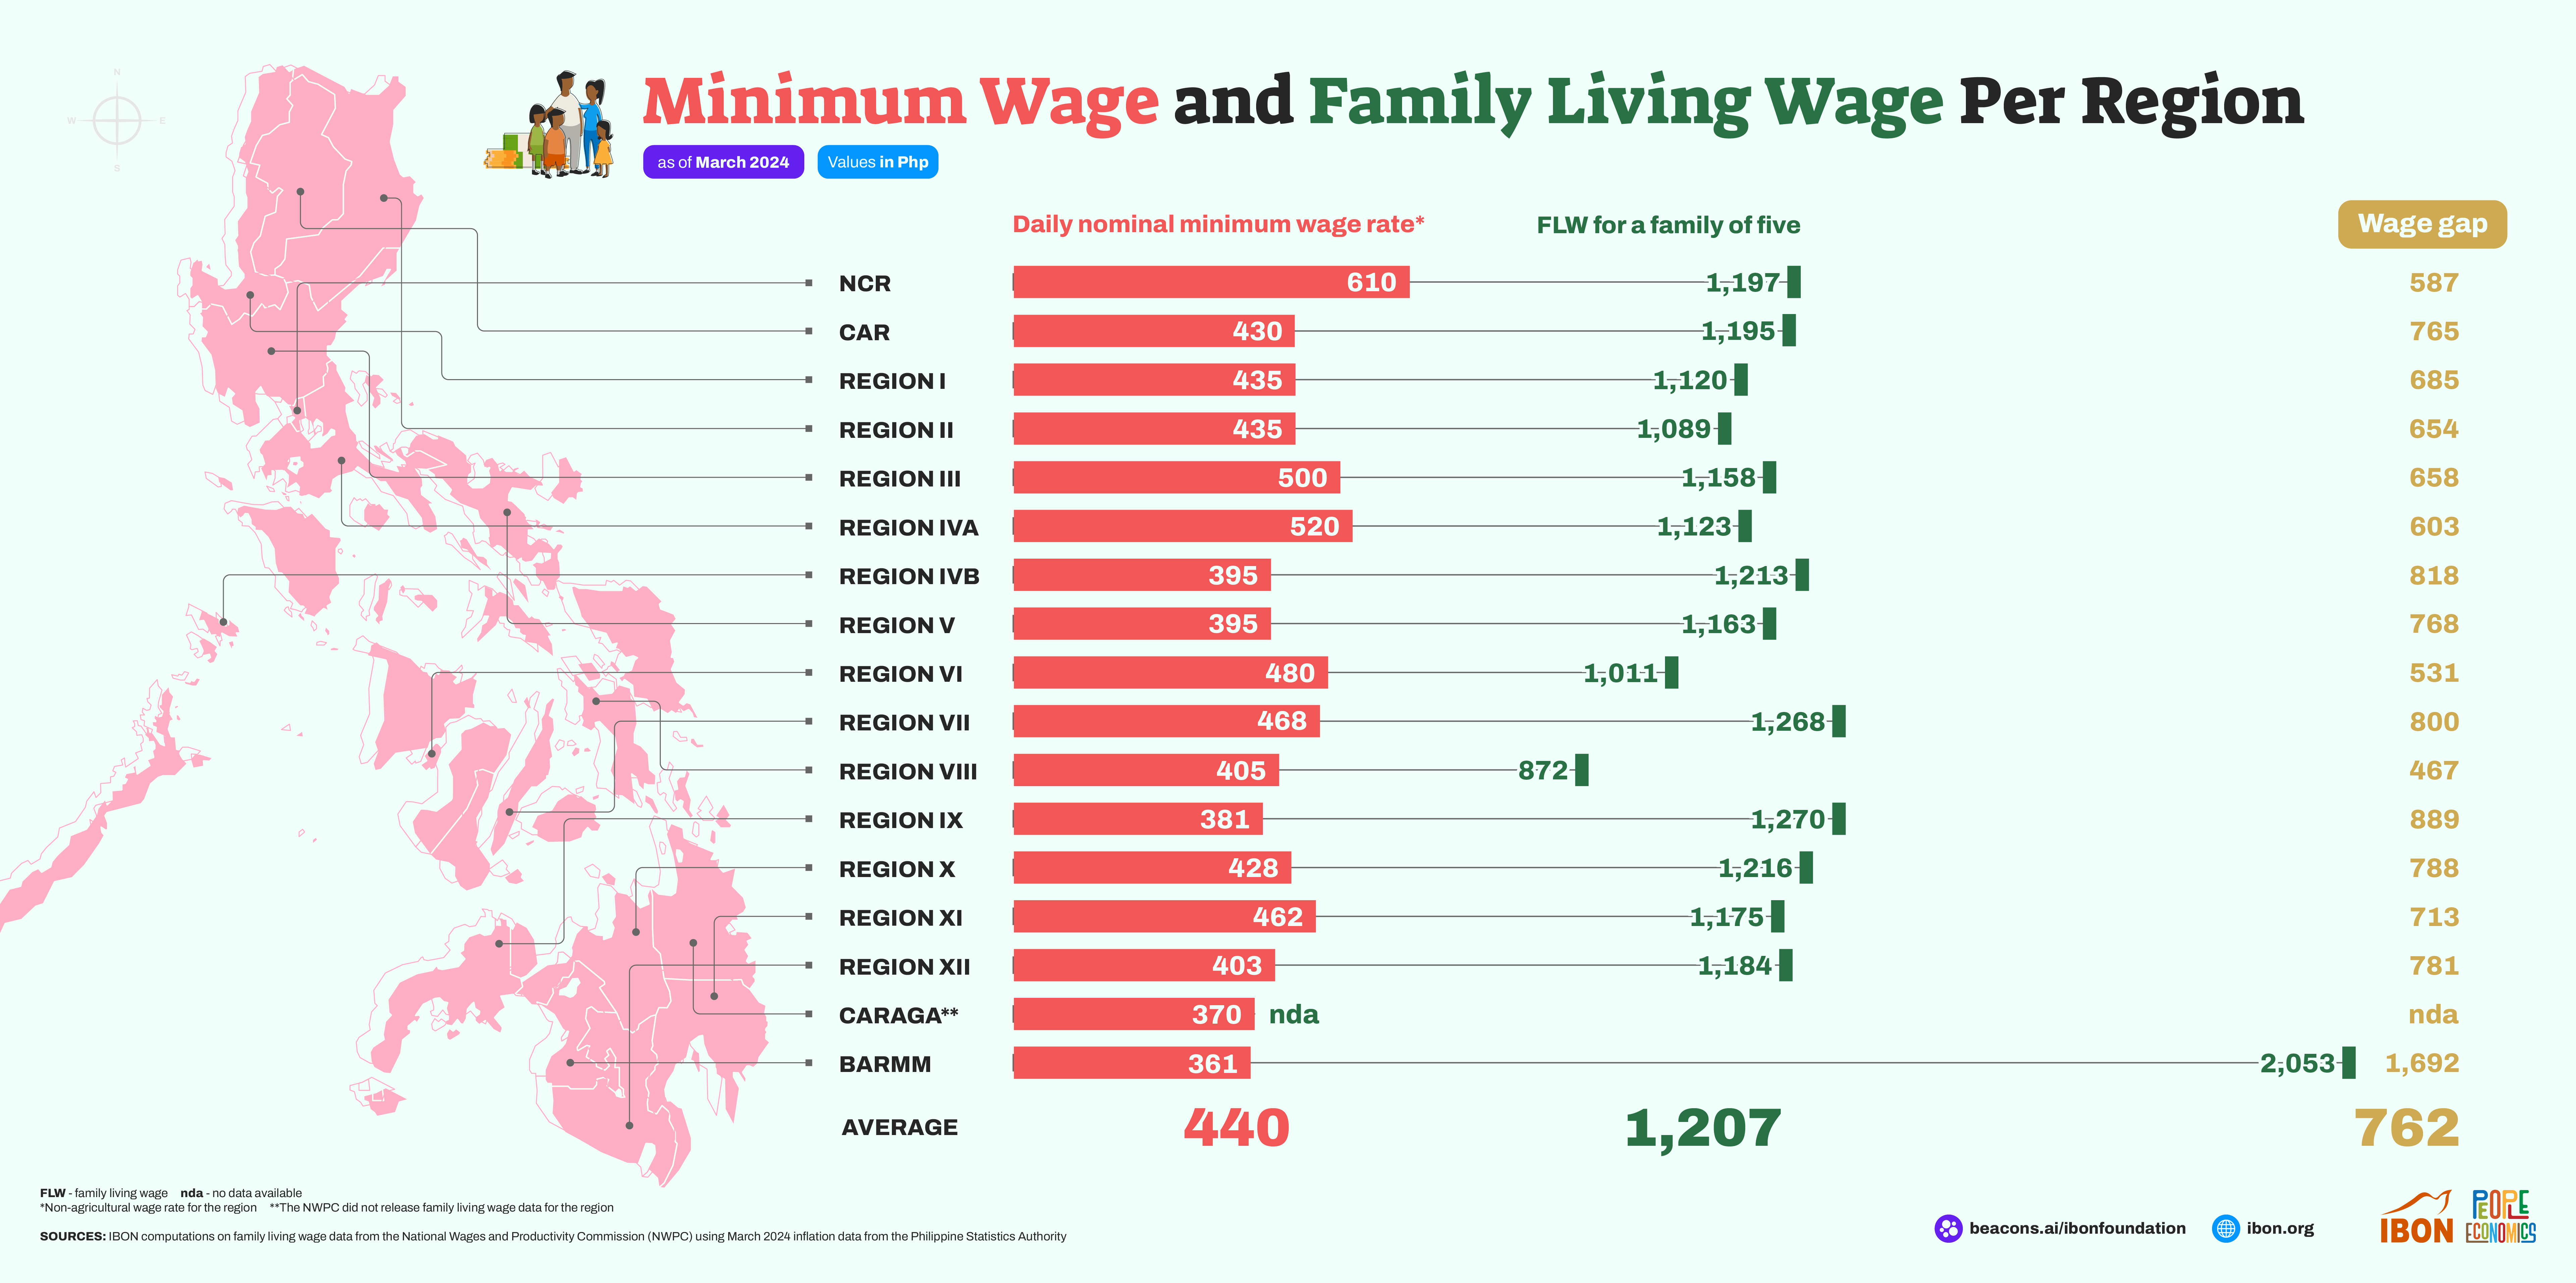 PH daily wage too low to meet family living wage, says Ibon Foundation